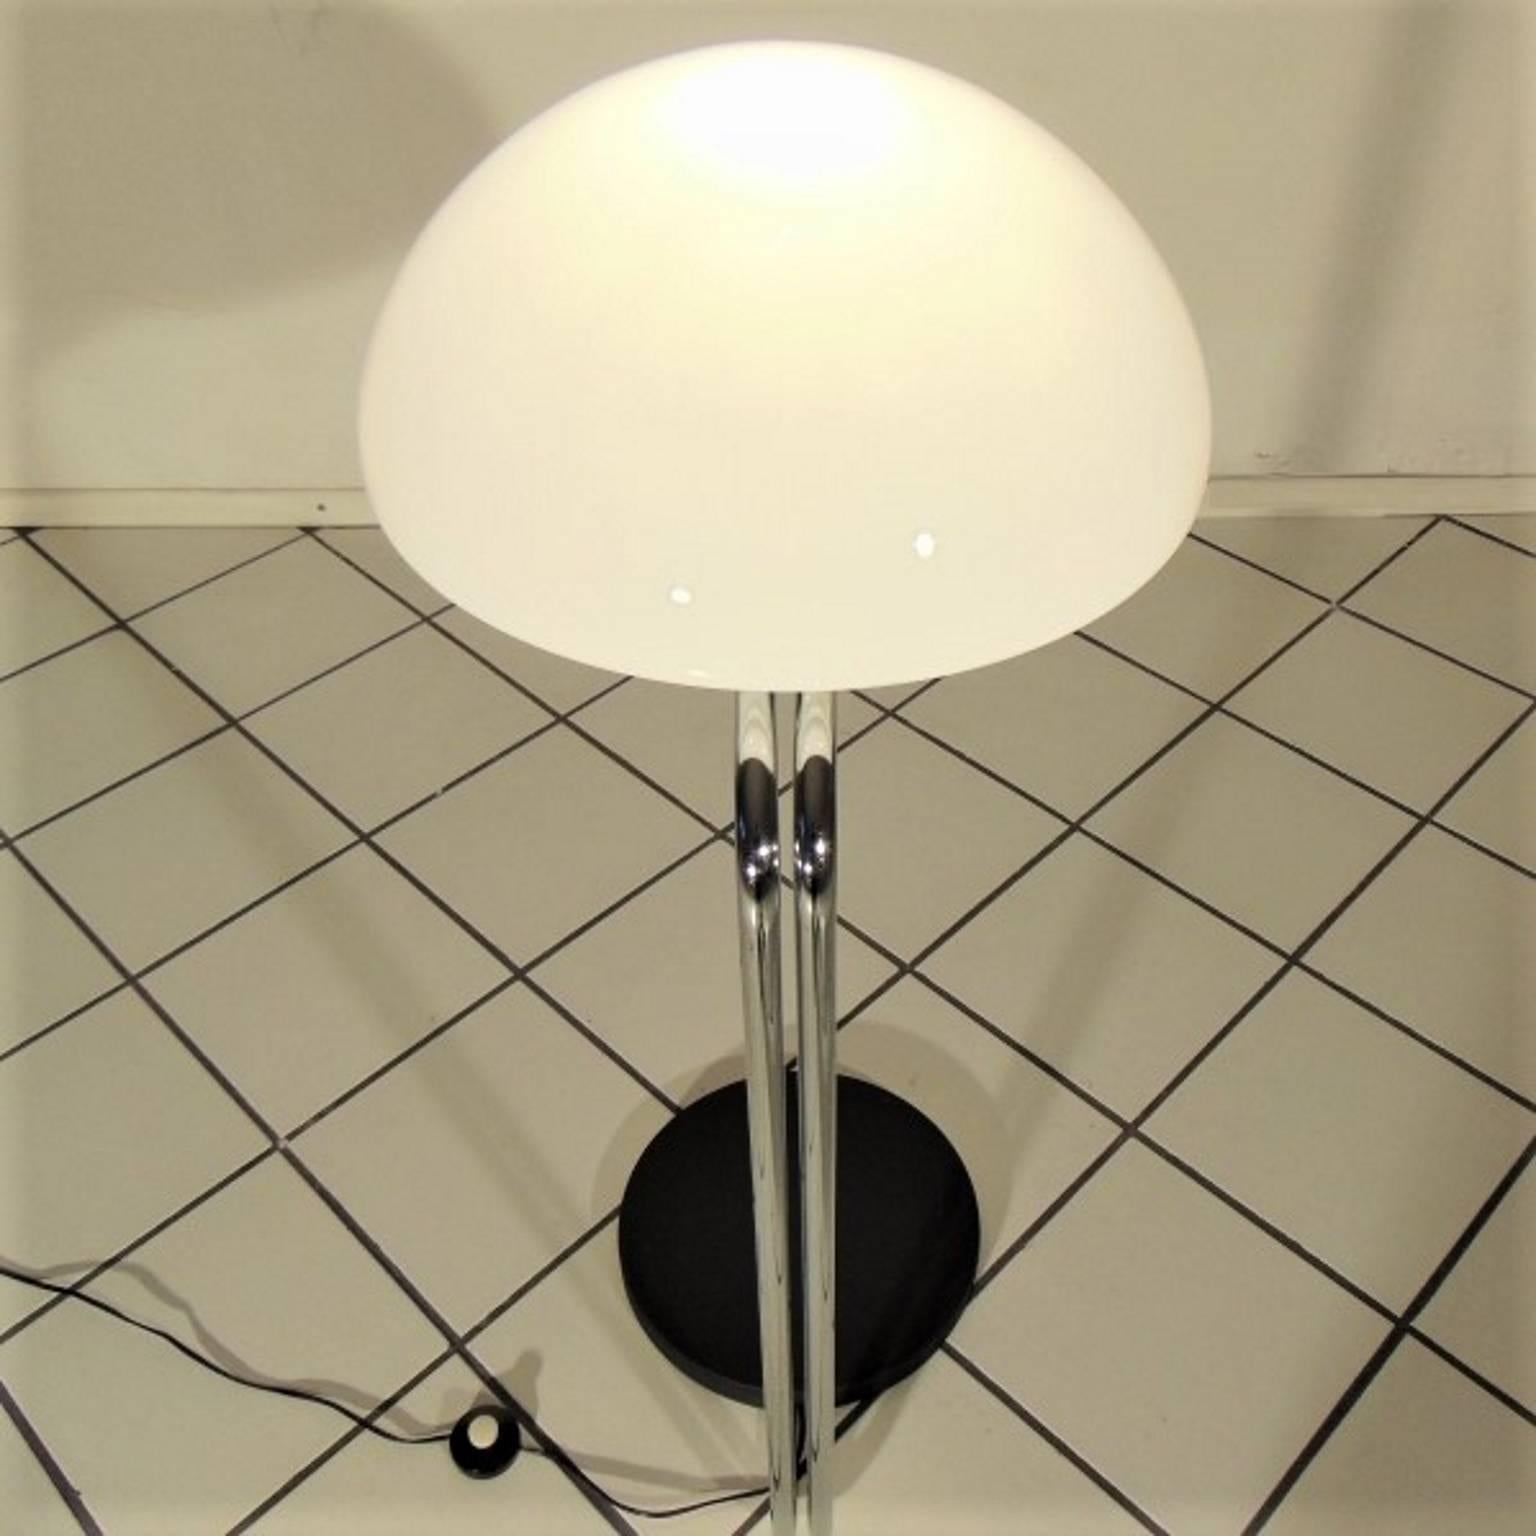 1972 Floor Lamp Opaline White Glass, Steel, Black Base by Sormani Nucleo, Italy For Sale 2